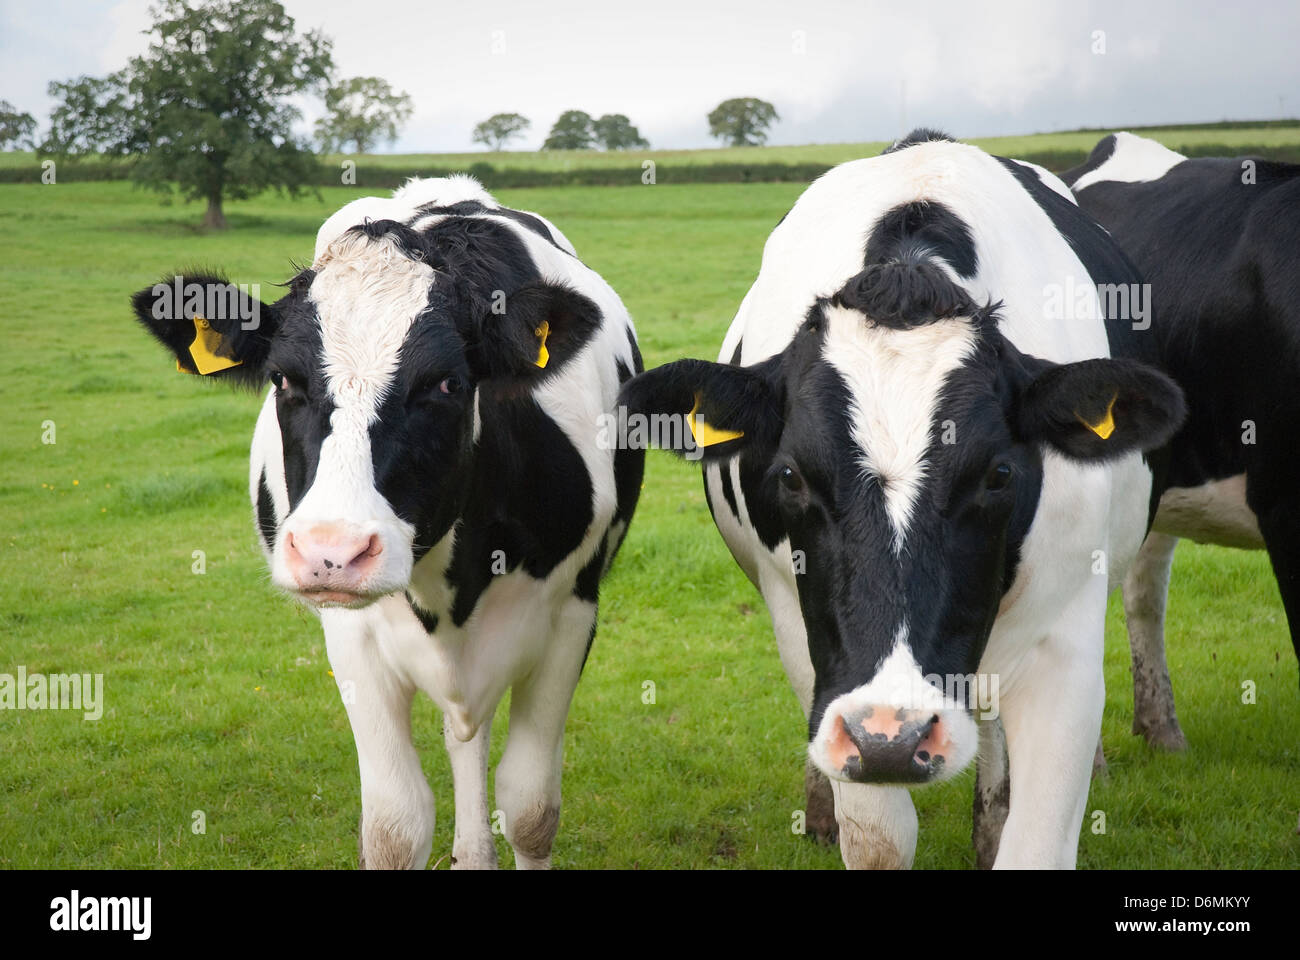 Dairy farm cows in Wiltshire, UK. Stock Photo